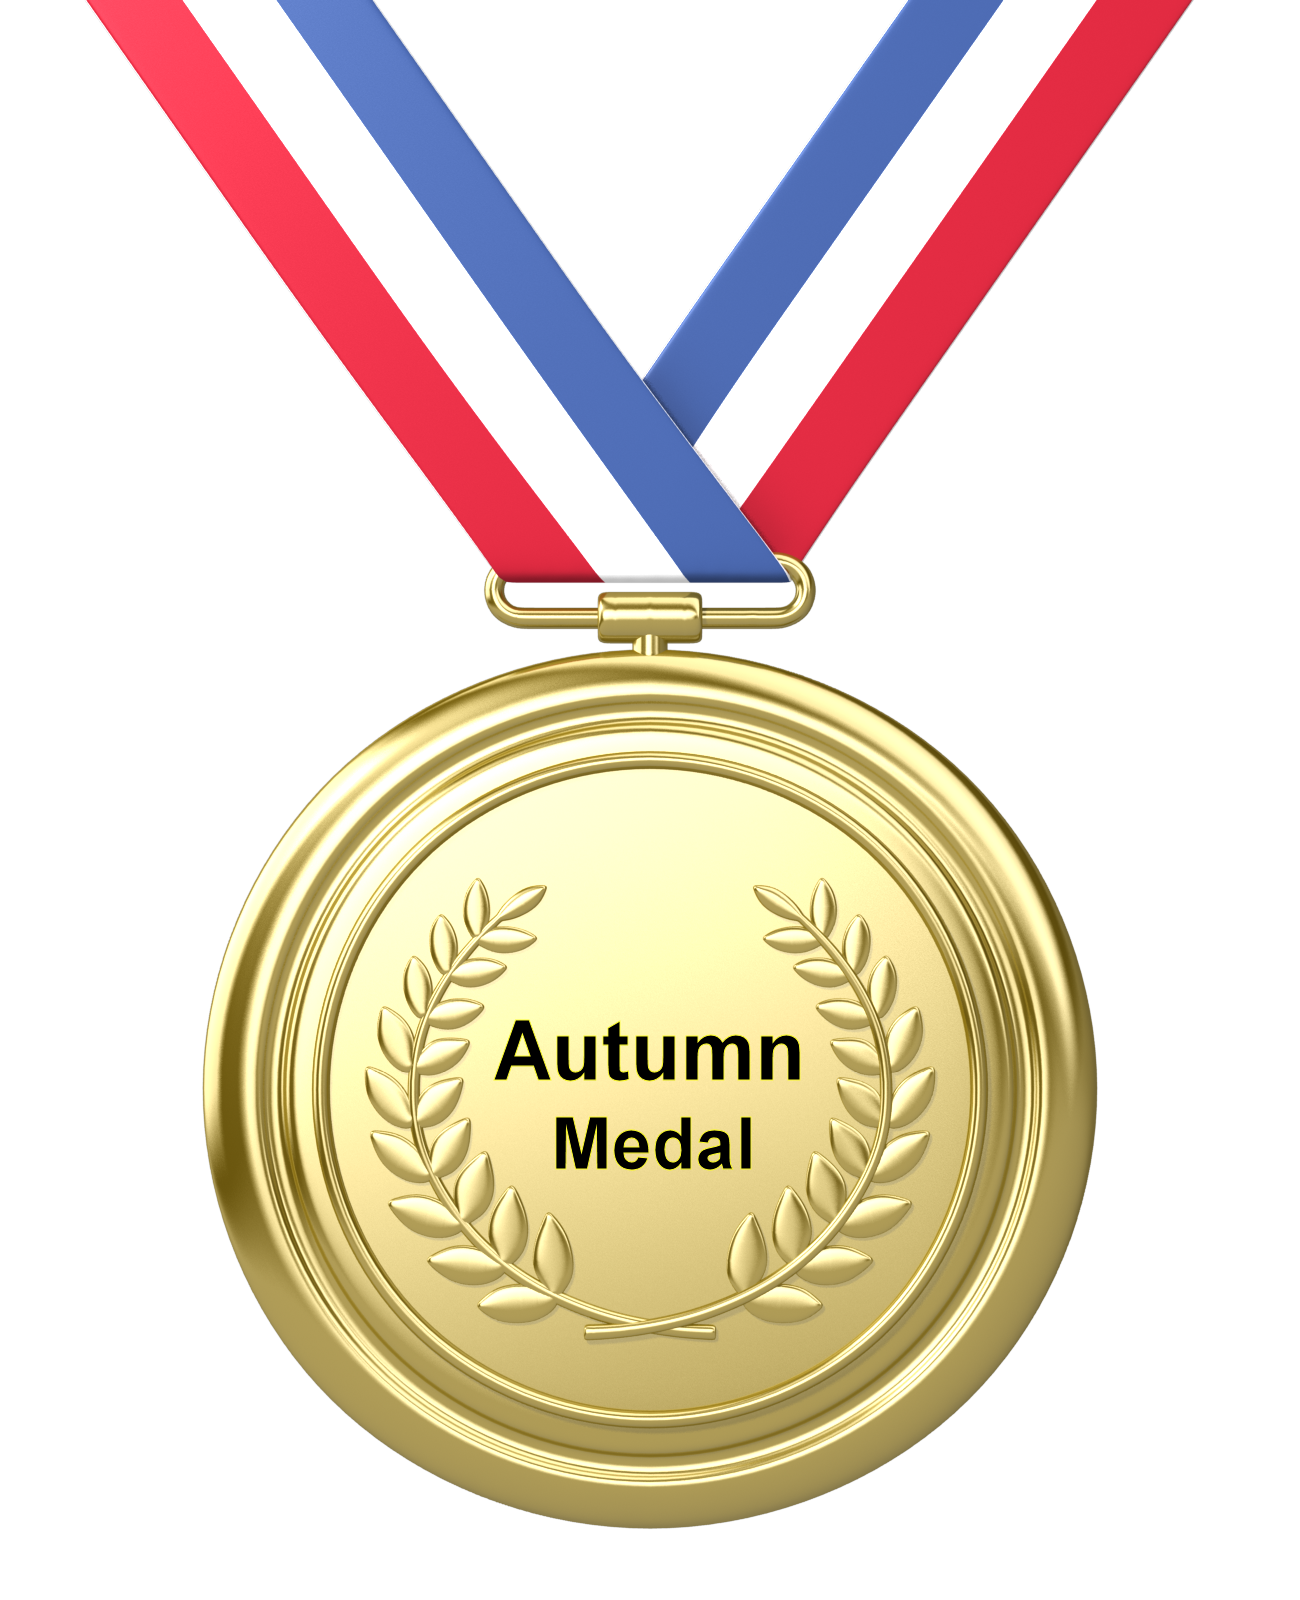 File:Autumn Medal.png - Wikimedia Commons